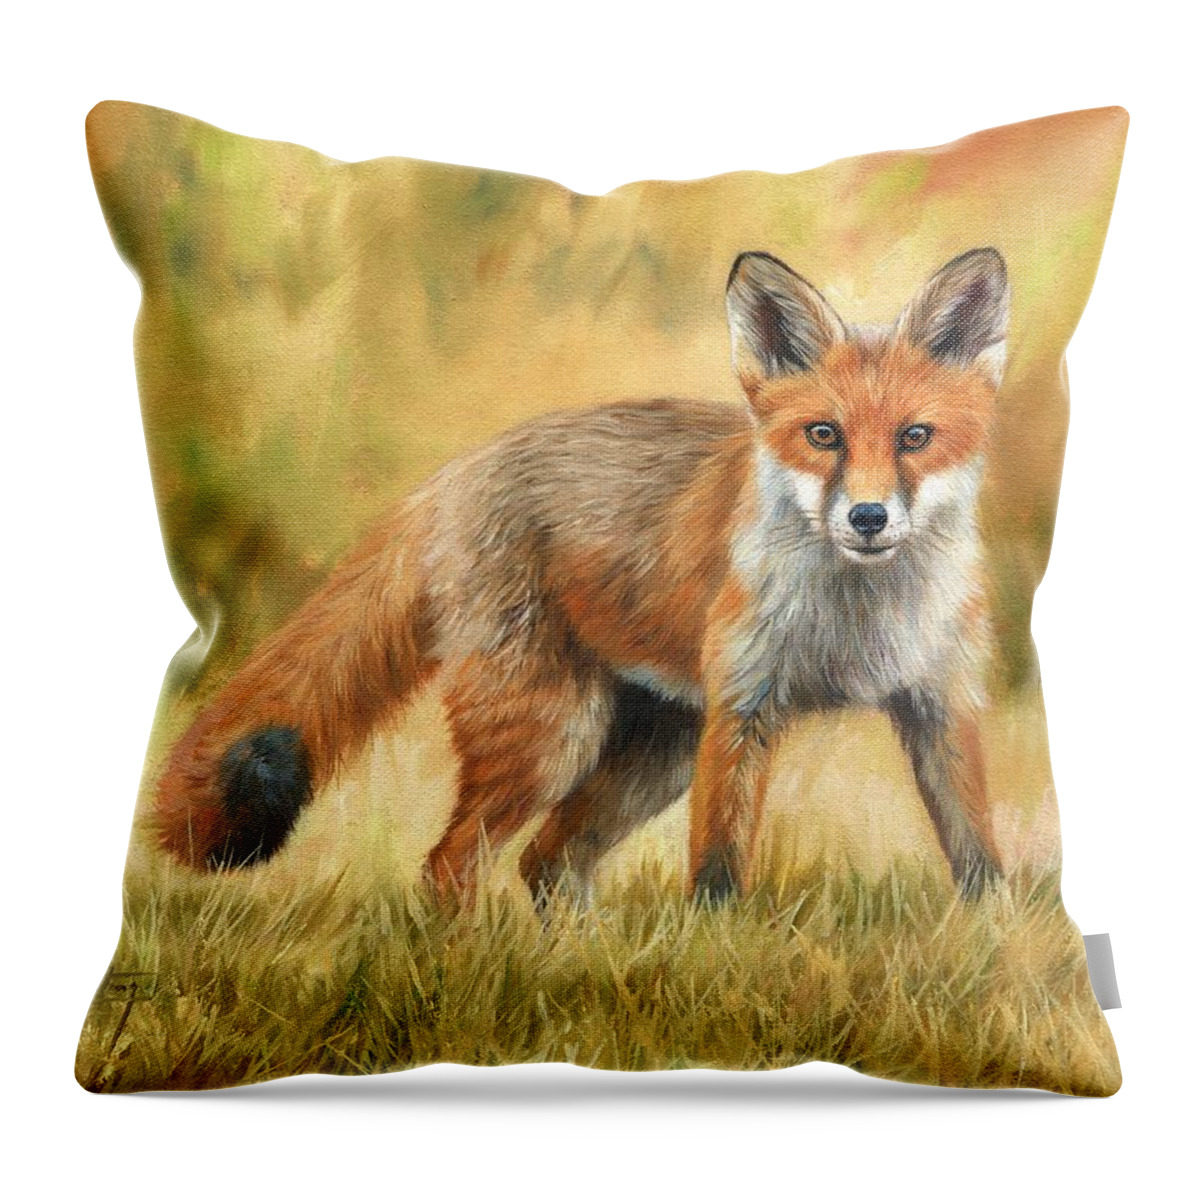 Fox Throw Pillow featuring the painting Red Fox by David Stribbling